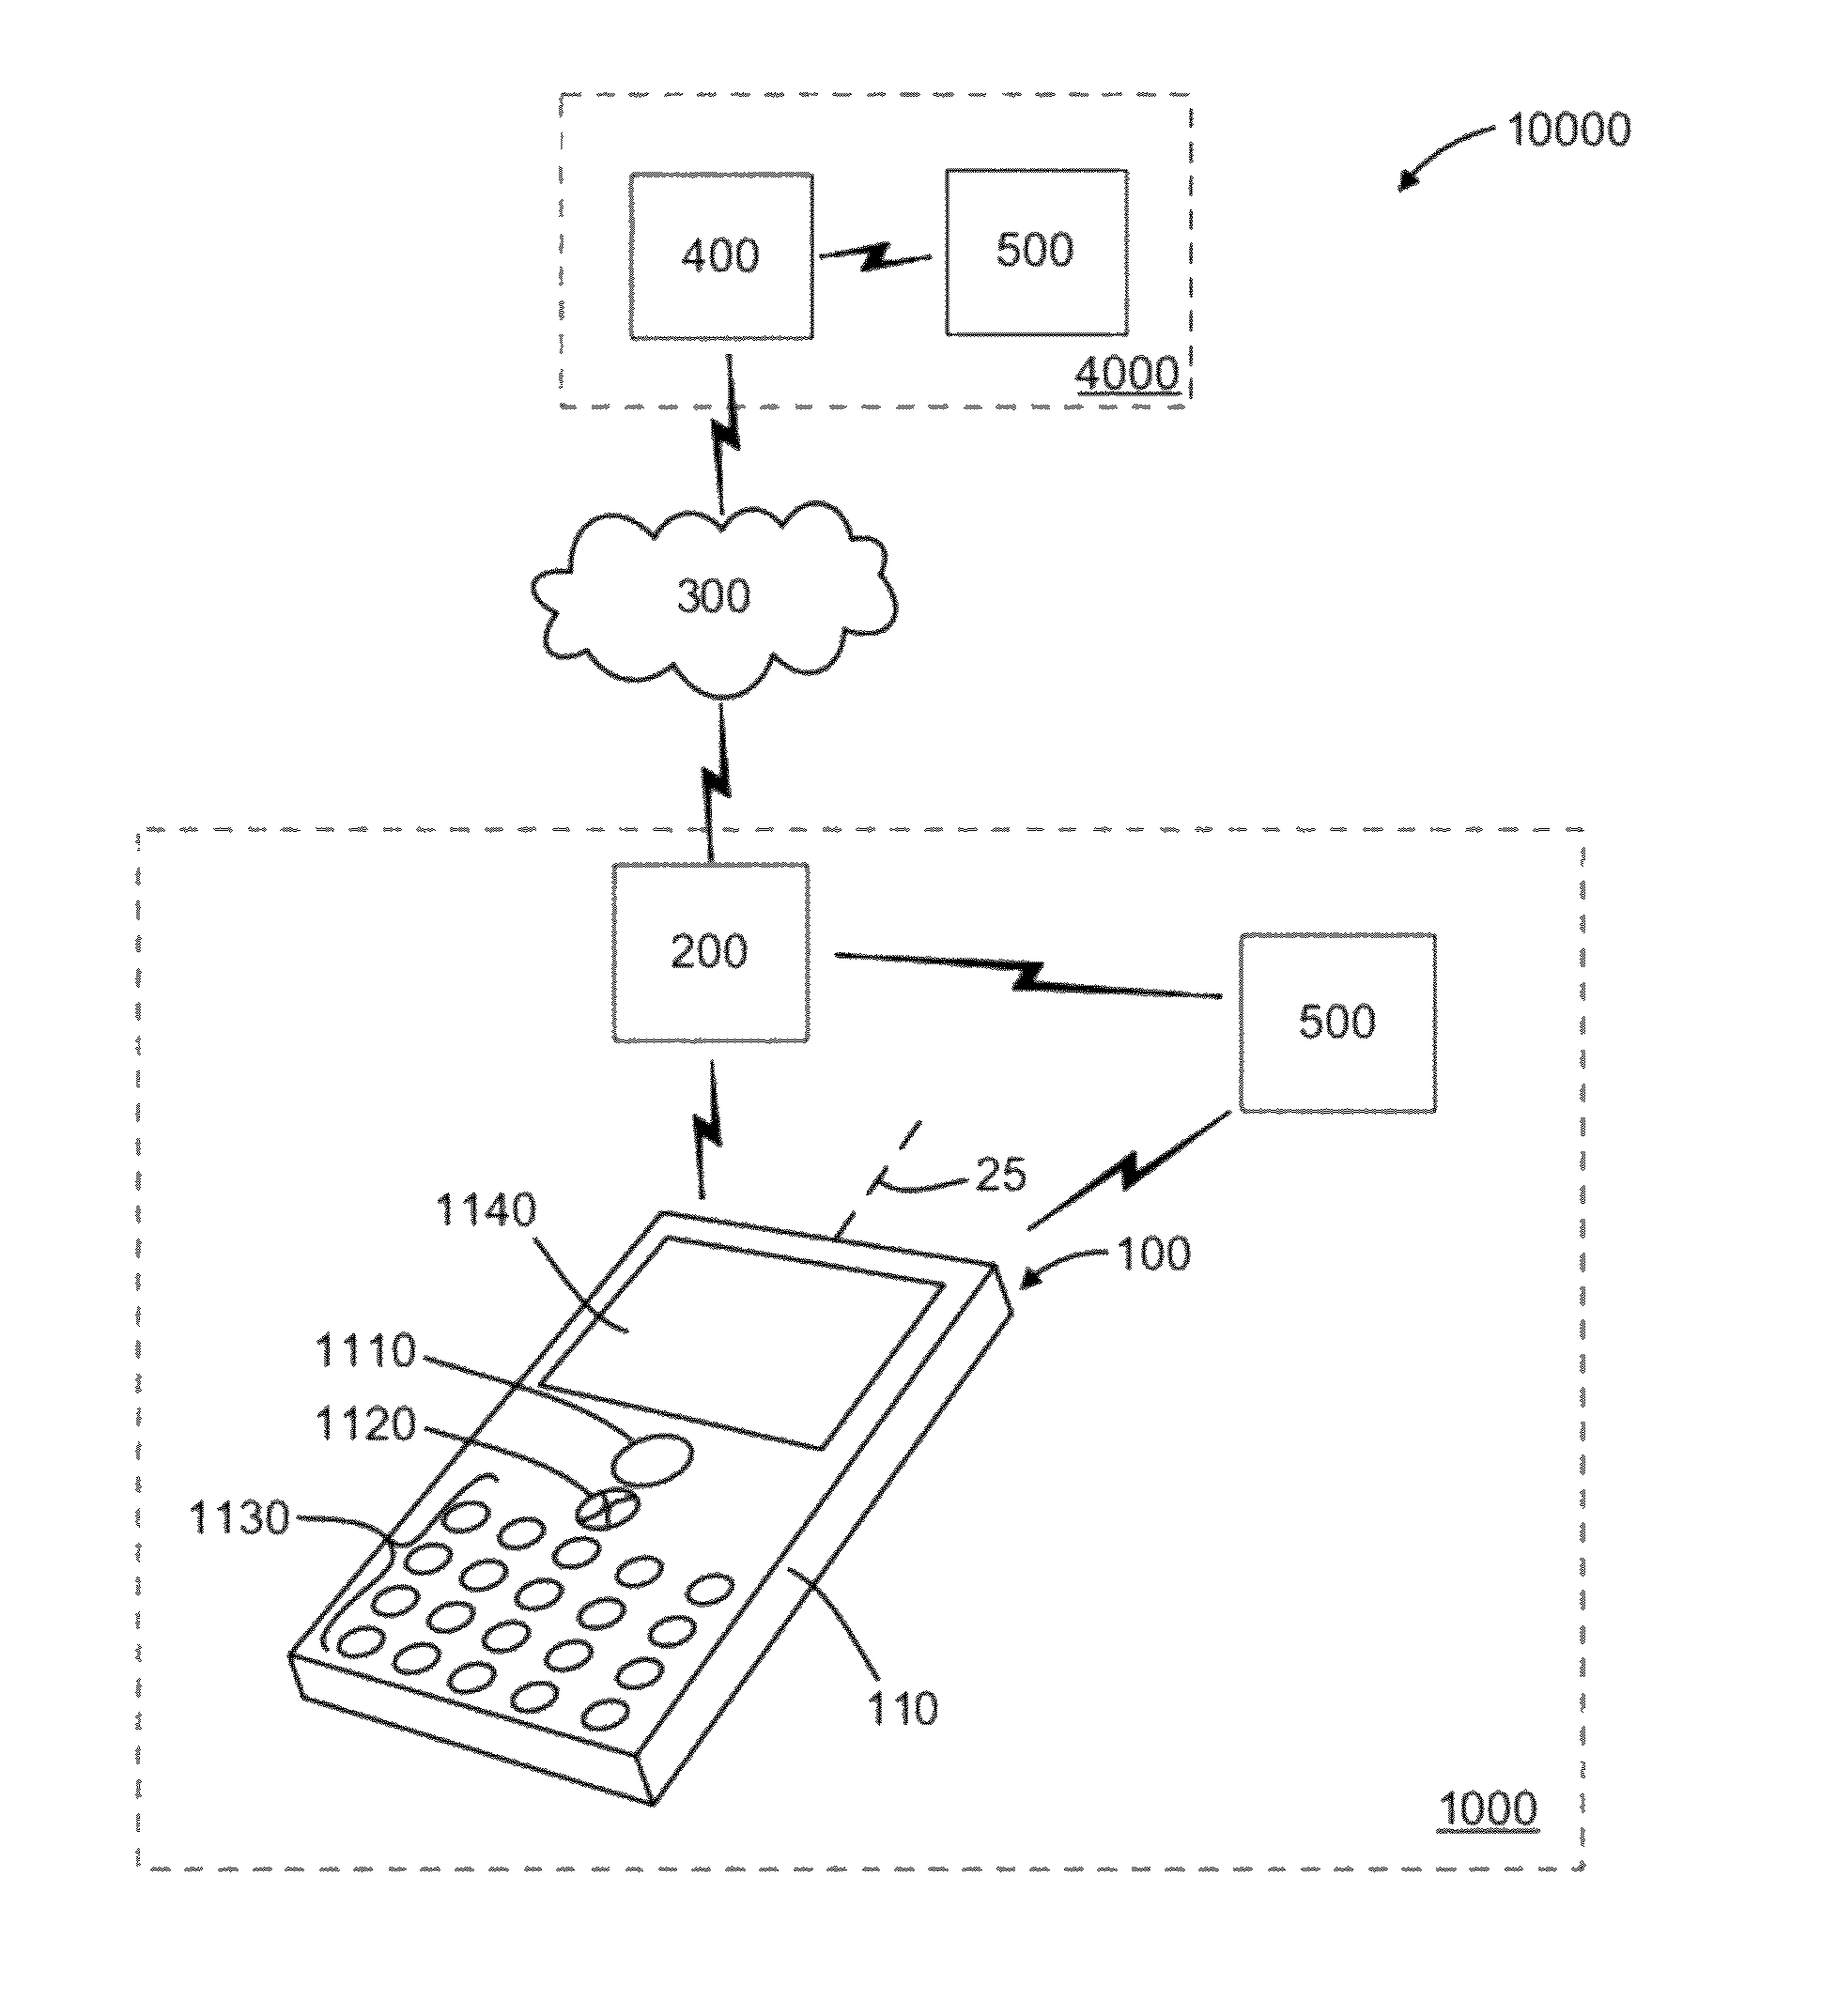 Method and system operative to process monochrome image data